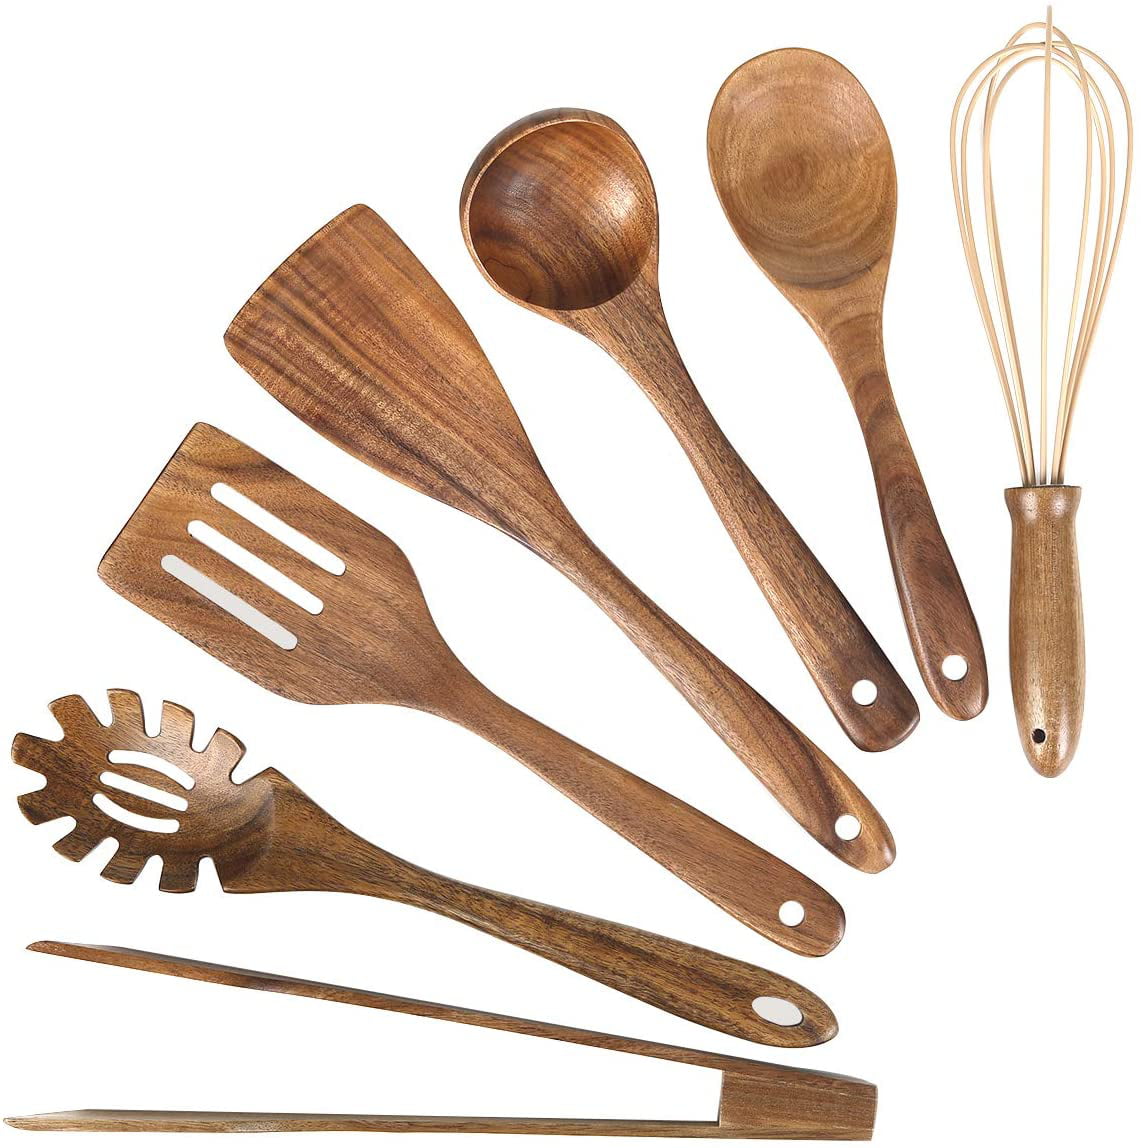 Wooden Utensils for Kitchen,6 Pack Wooden Spoons for Cooking Natural Teak Wood Spatula Draining Spoon Whisk and Salad Fork,Cooking Utensils Set 